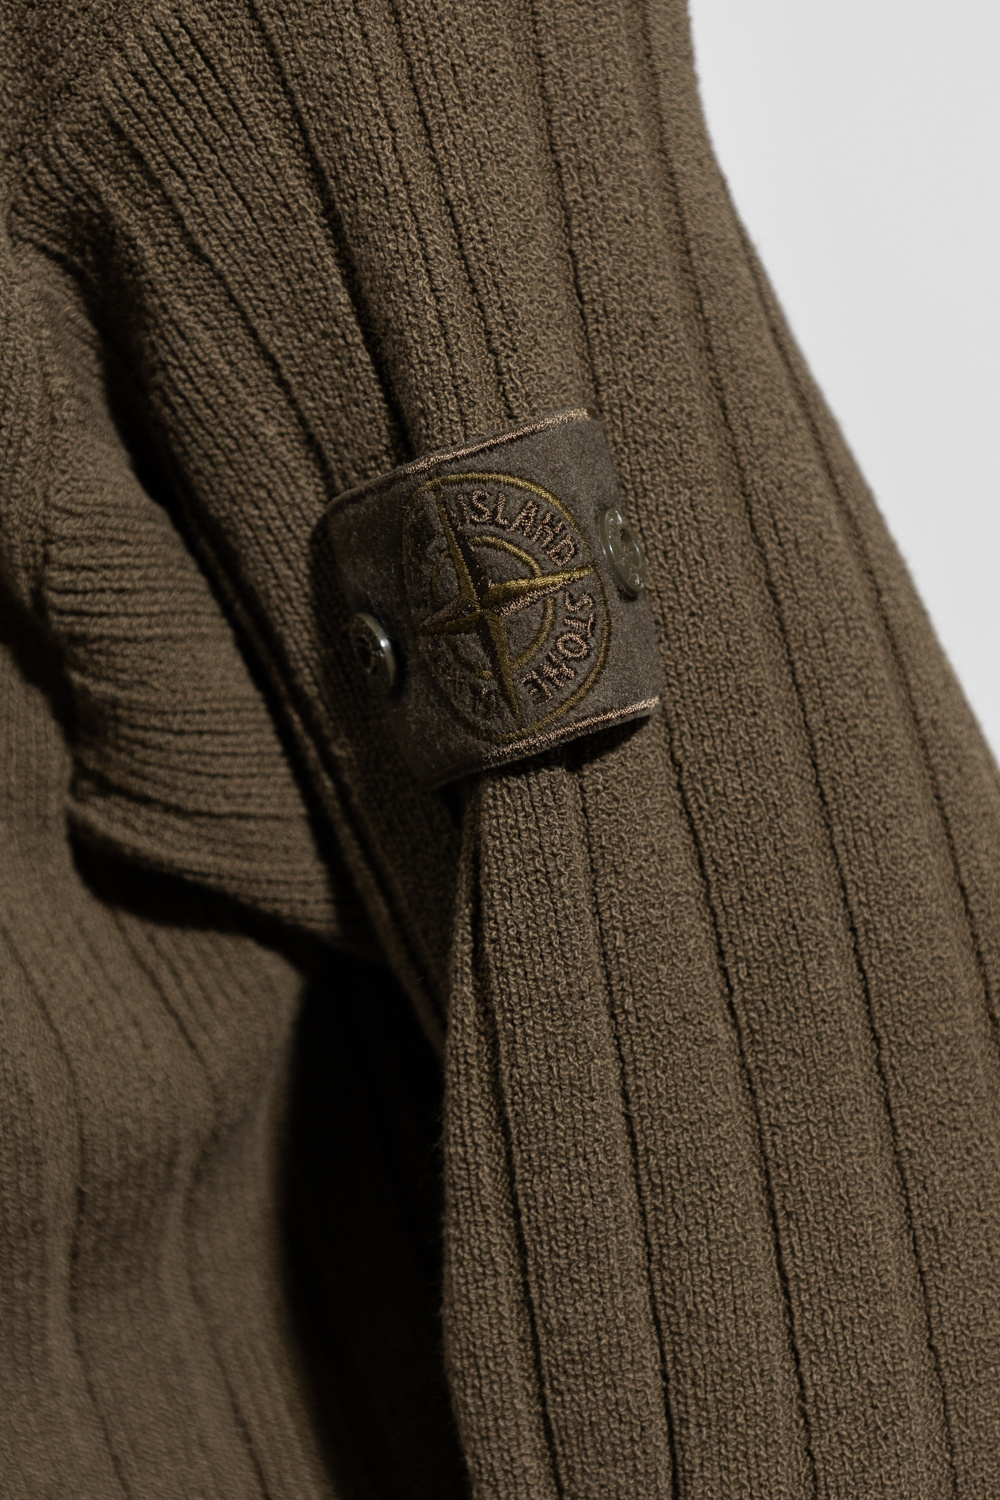 Stone Island sweater Rock with standing collar